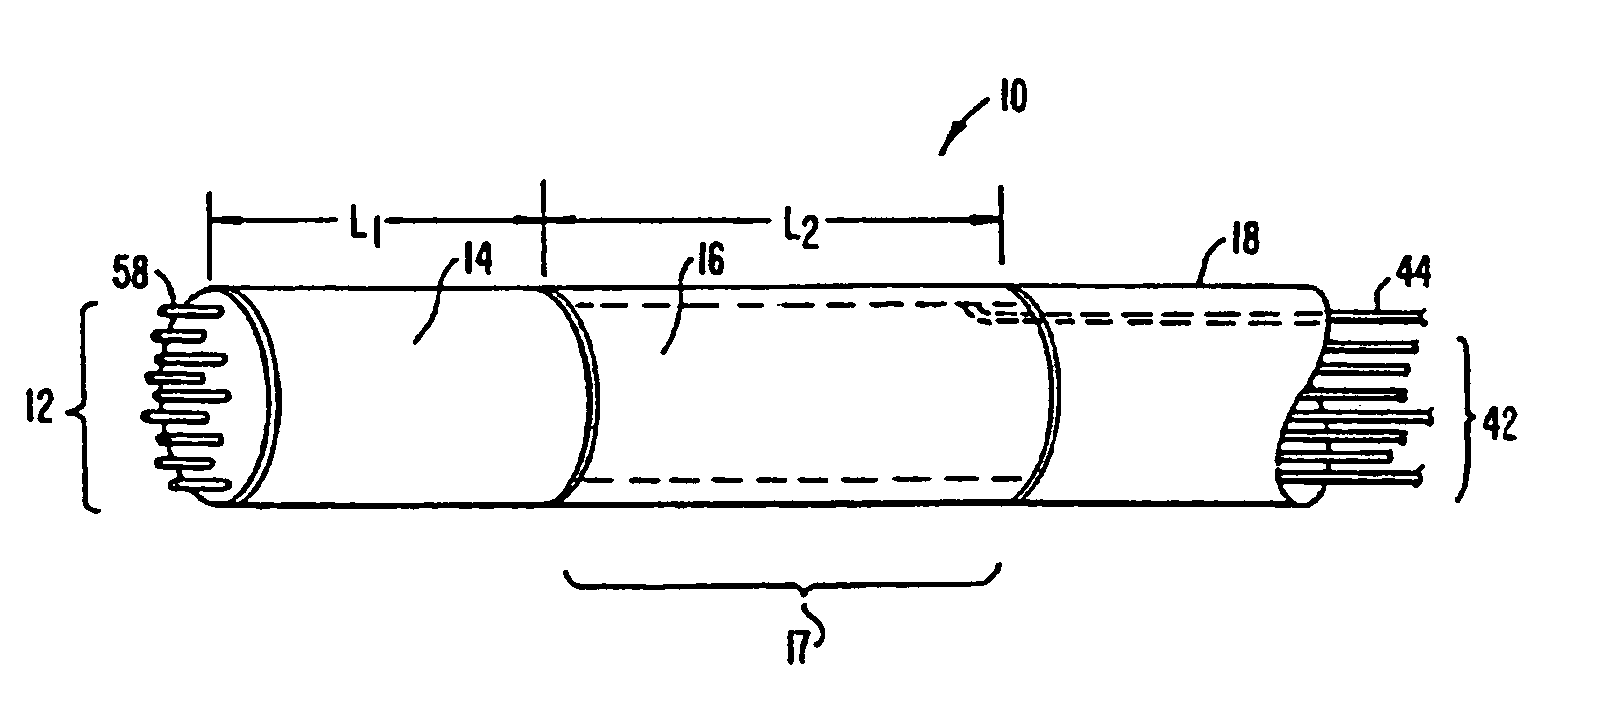 Methods for electrosurgical tissue treatment in electrically conductive fluid